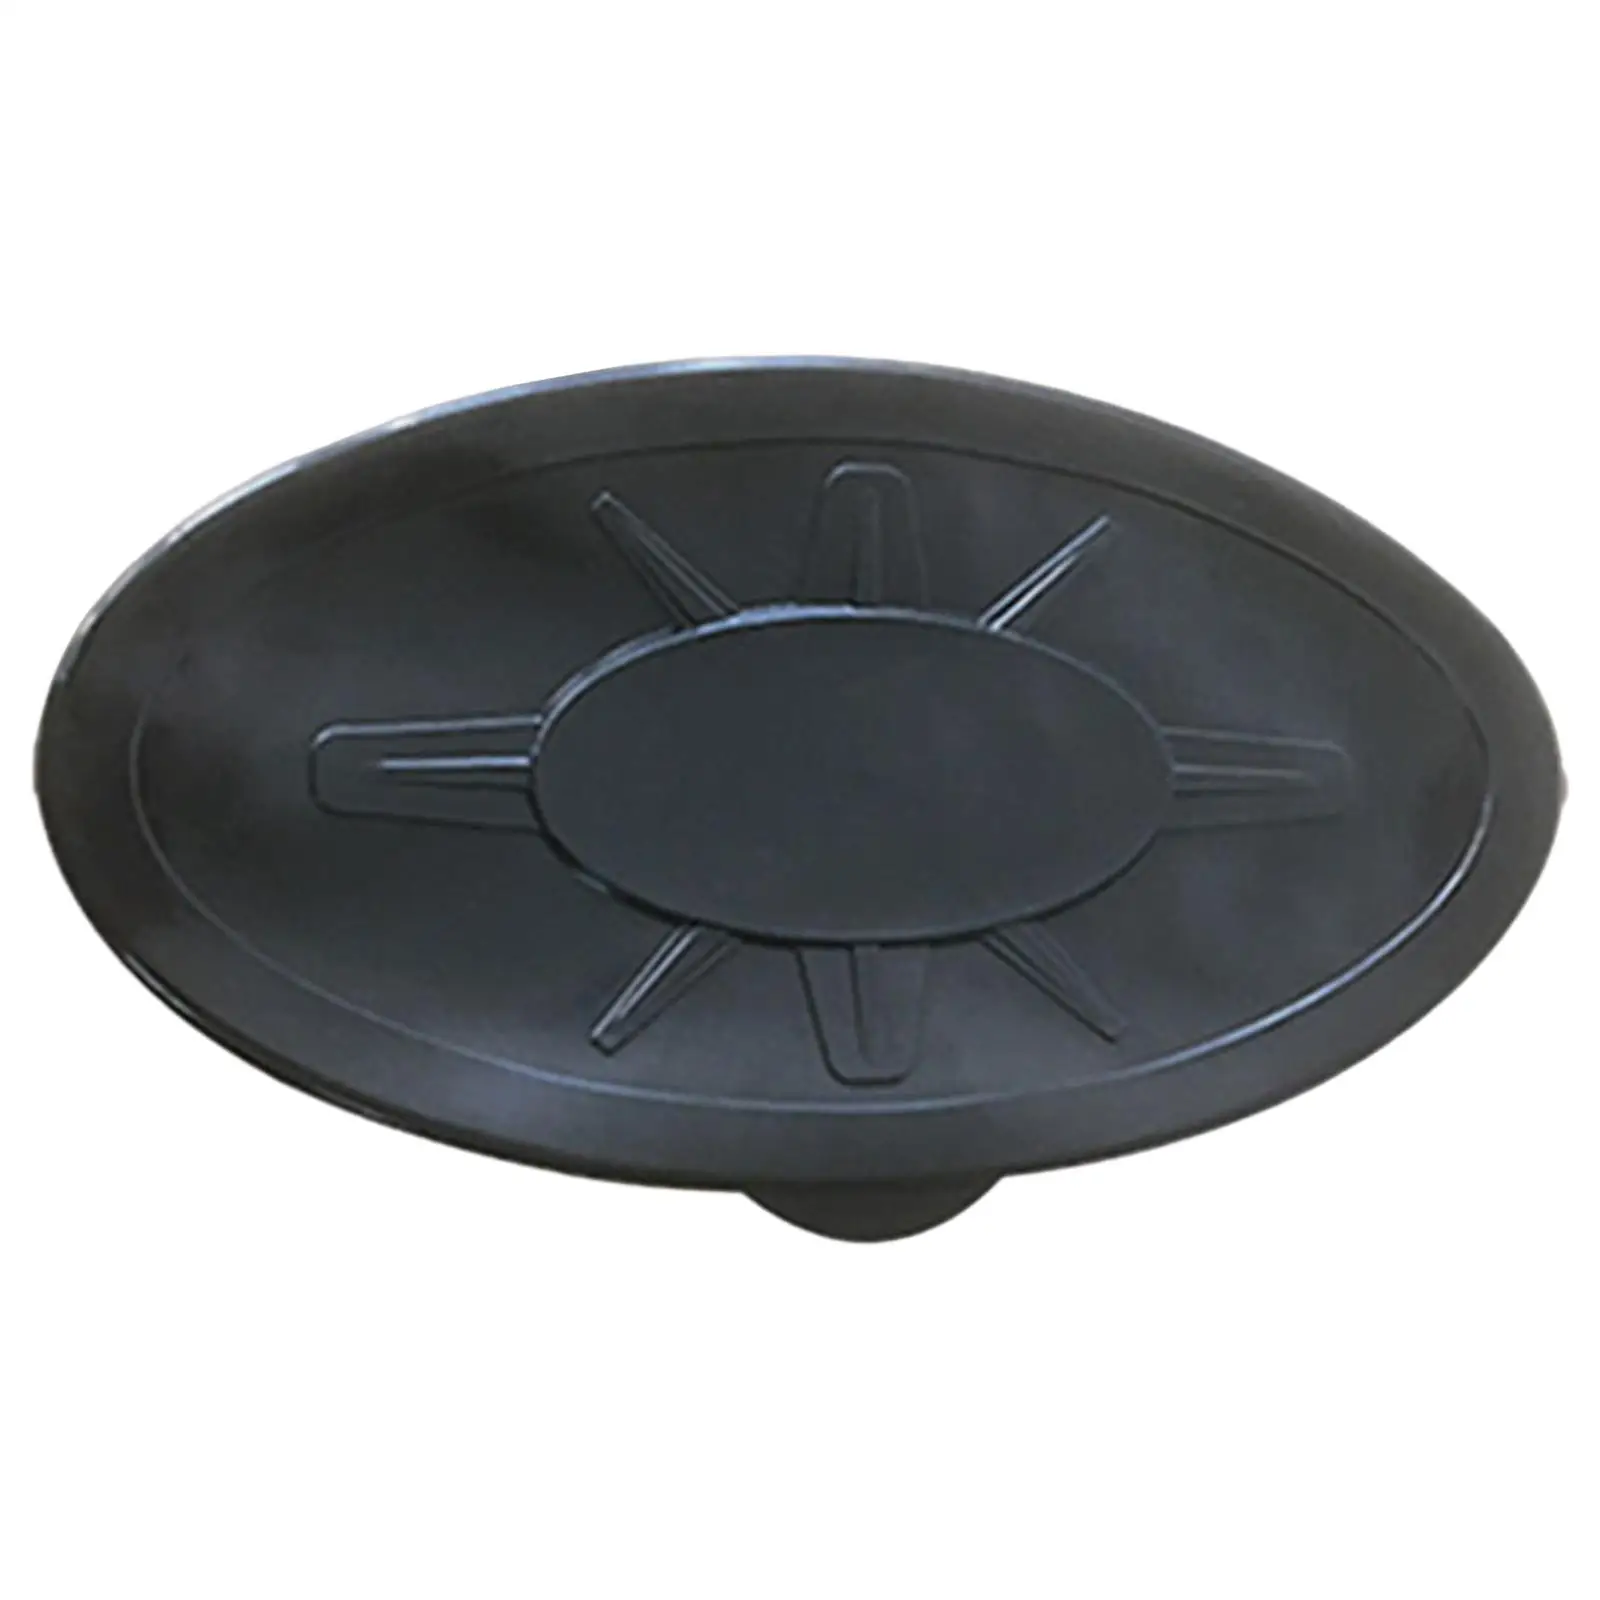 Kayak Hatches Sealing Hatch 9 inch Access Hatch Parts Replacement Hatches for